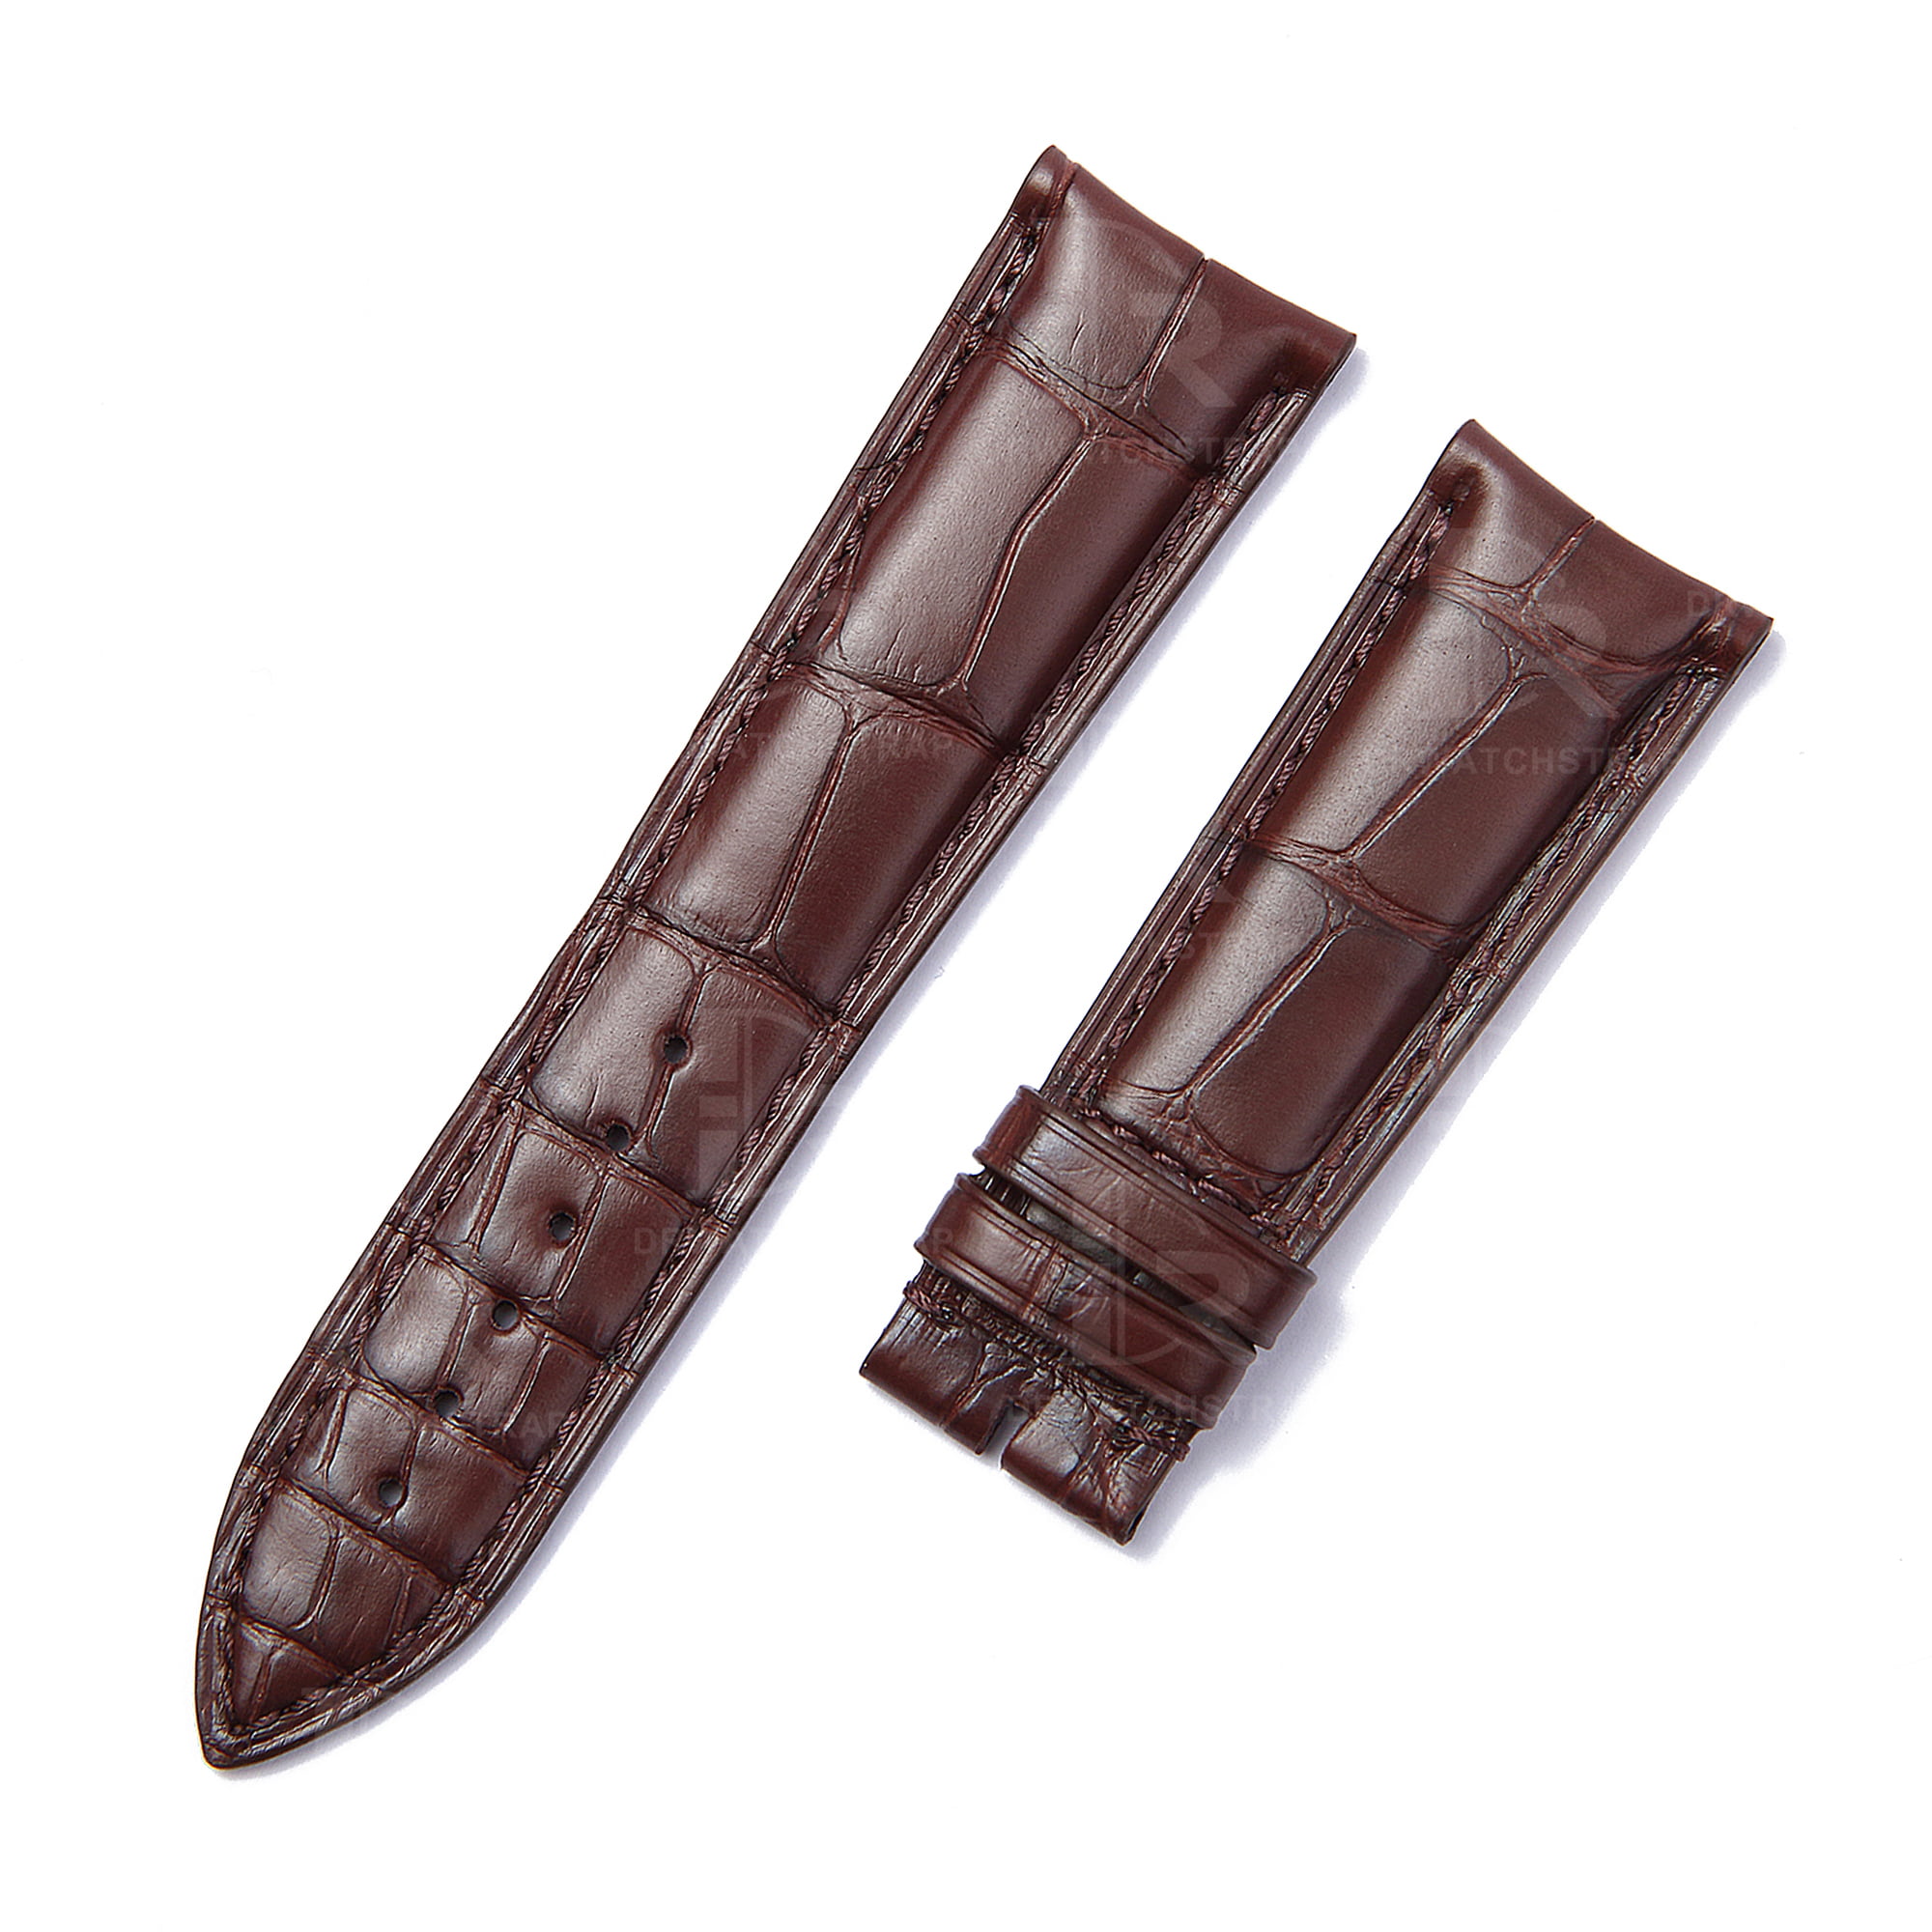 Buy Curved End brown custom Alligator brown leather watch band for Audemars Piguet Millenary